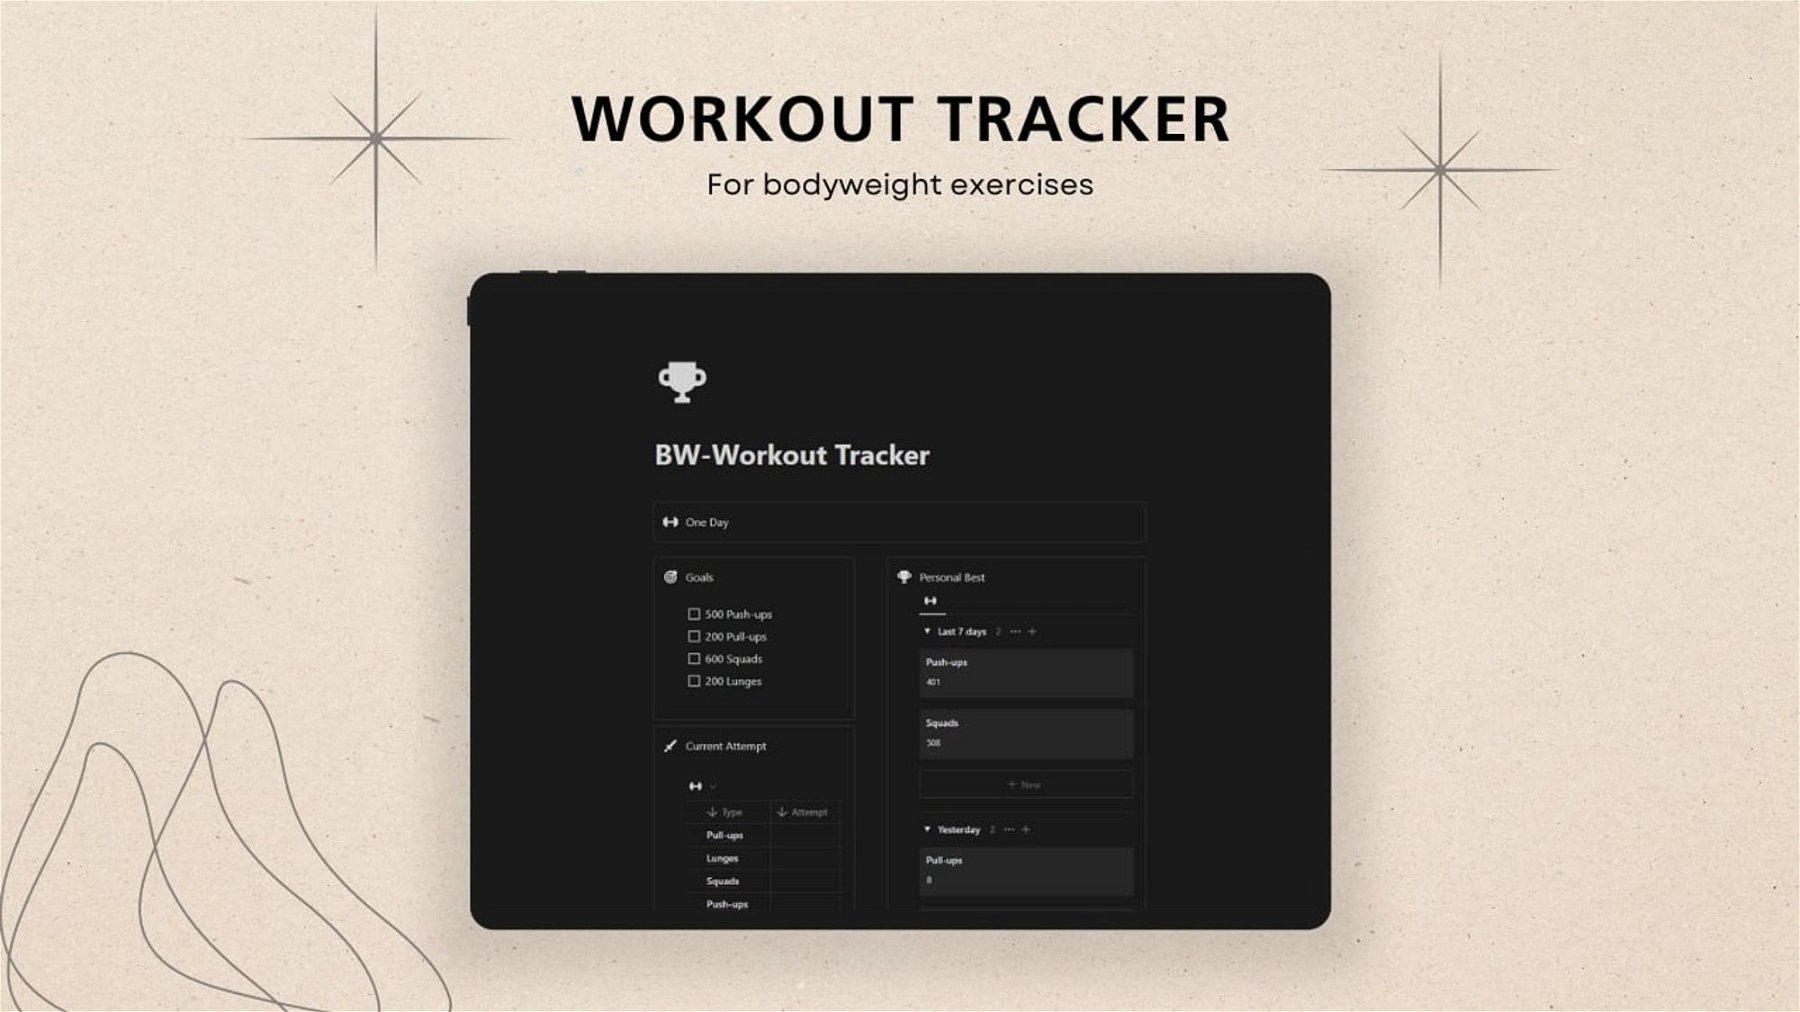 BW-Workout Tracker - Achieve Your Bodyweight Exercise Goals 🏆